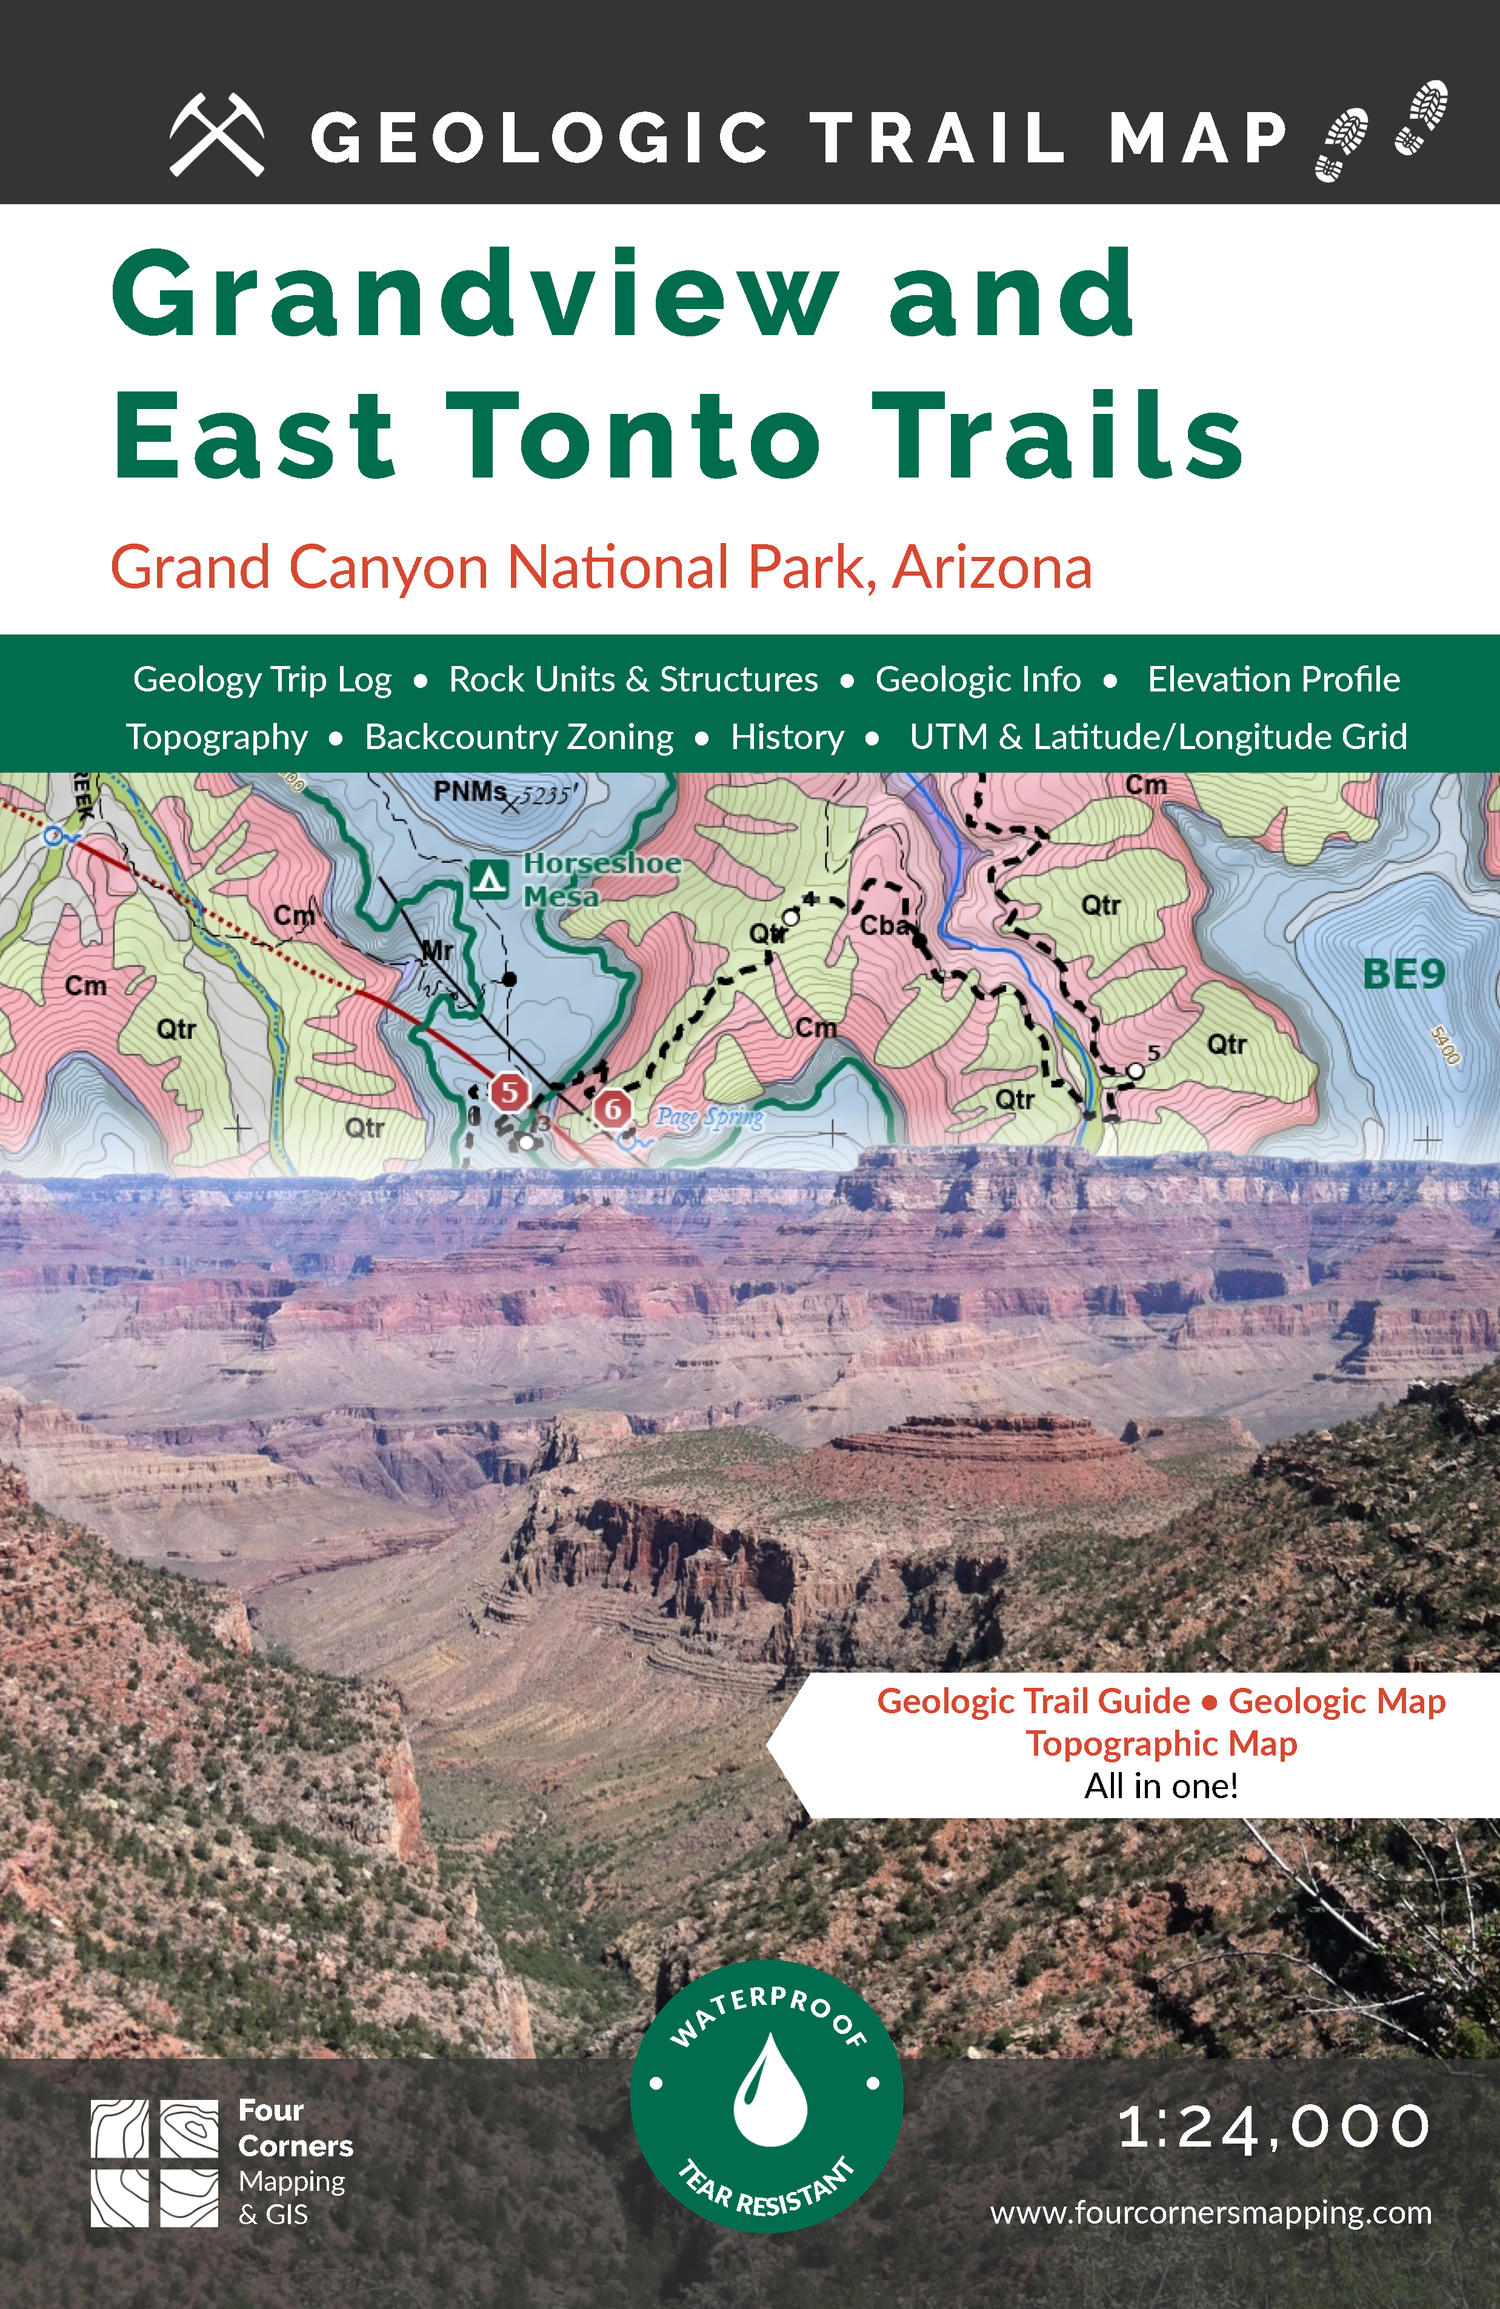 Four Corners Mapping's Geologic Trail Maps of the Grand Canyon, specifically the grandview and easton trails.